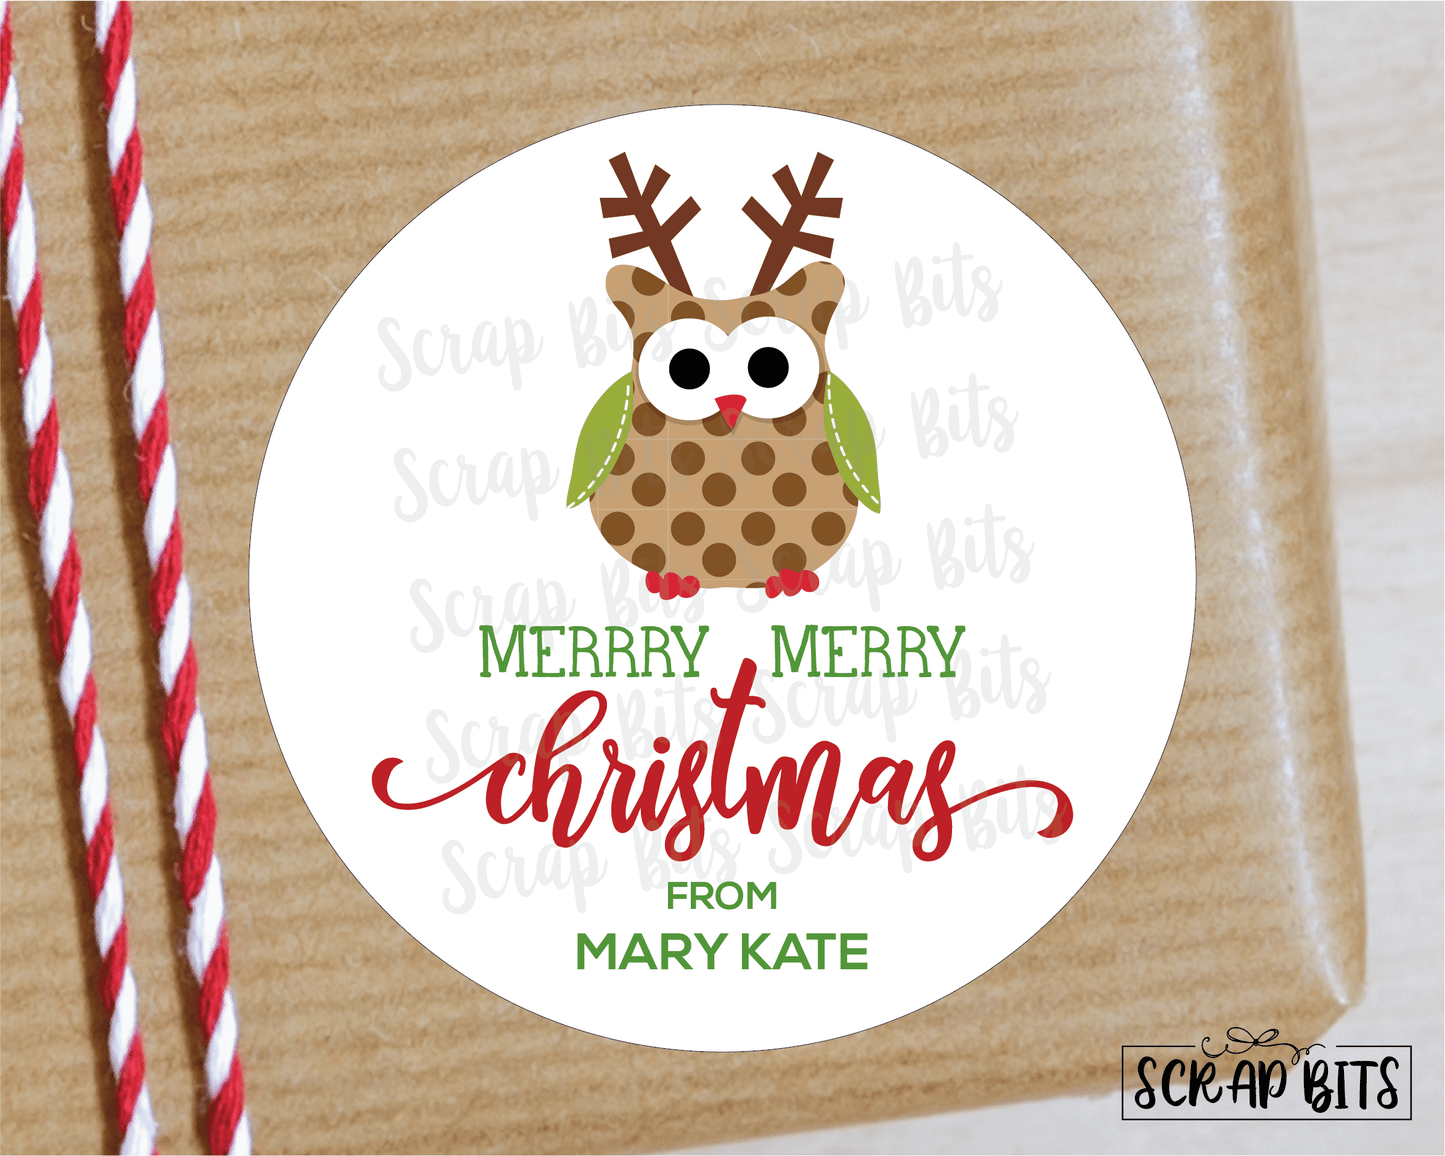 Christmas Owl with Antlers Stickers or Tags . Christmas Gift Labels - Scrap Bits